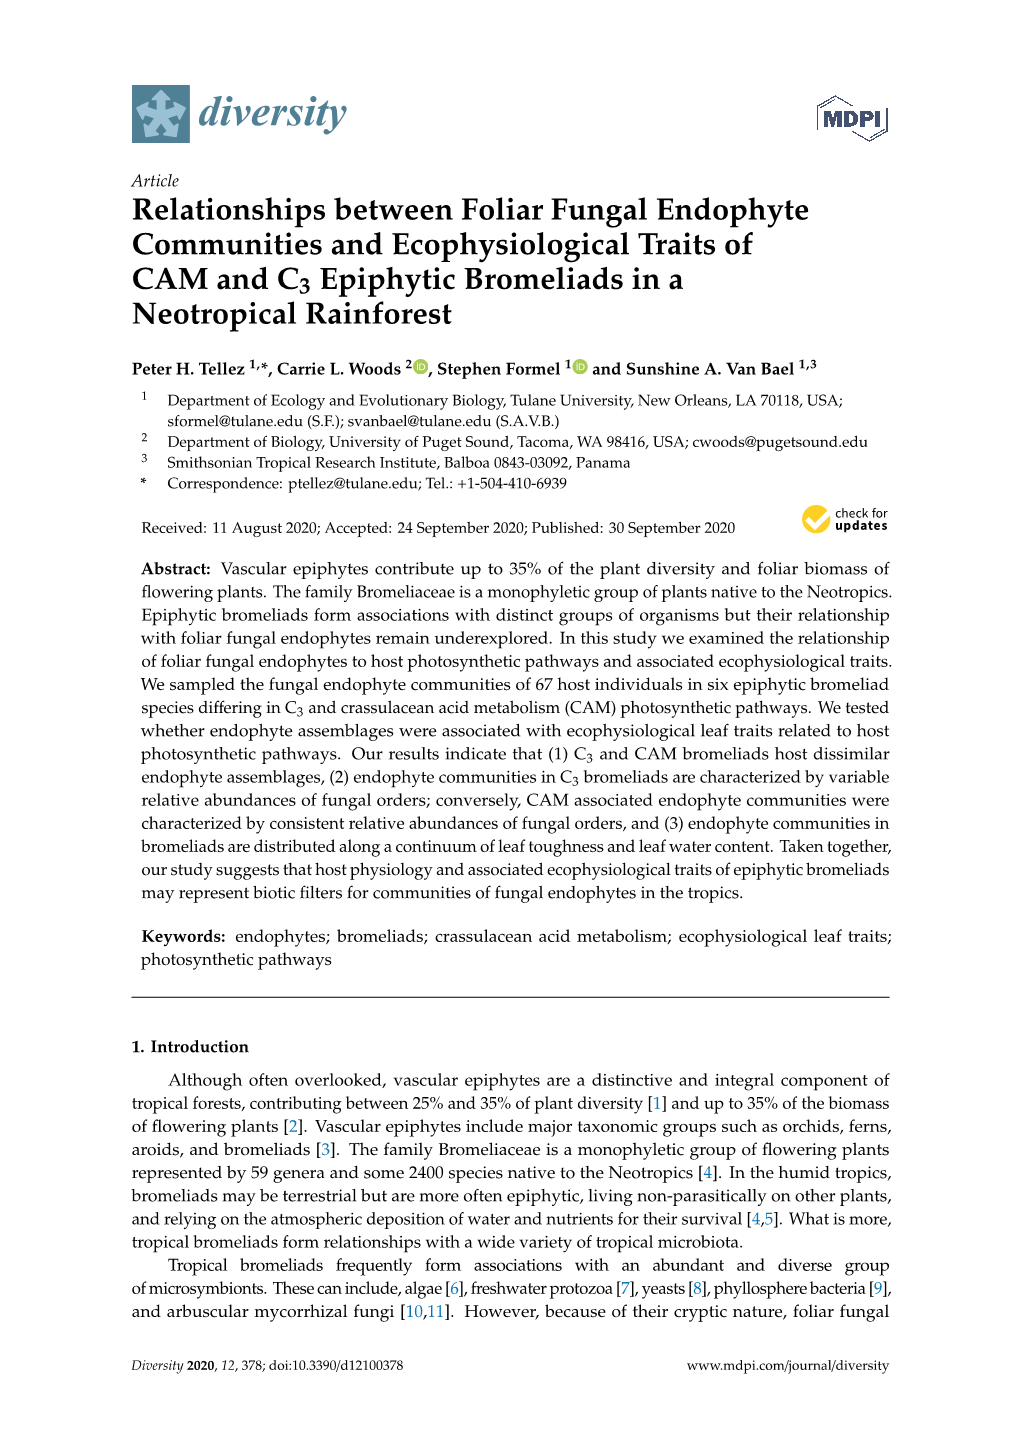 Relationships Between Foliar Fungal Endophyte Communities and Ecophysiological Traits of CAM and C3 Epiphytic Bromeliads in a Neotropical Rainforest